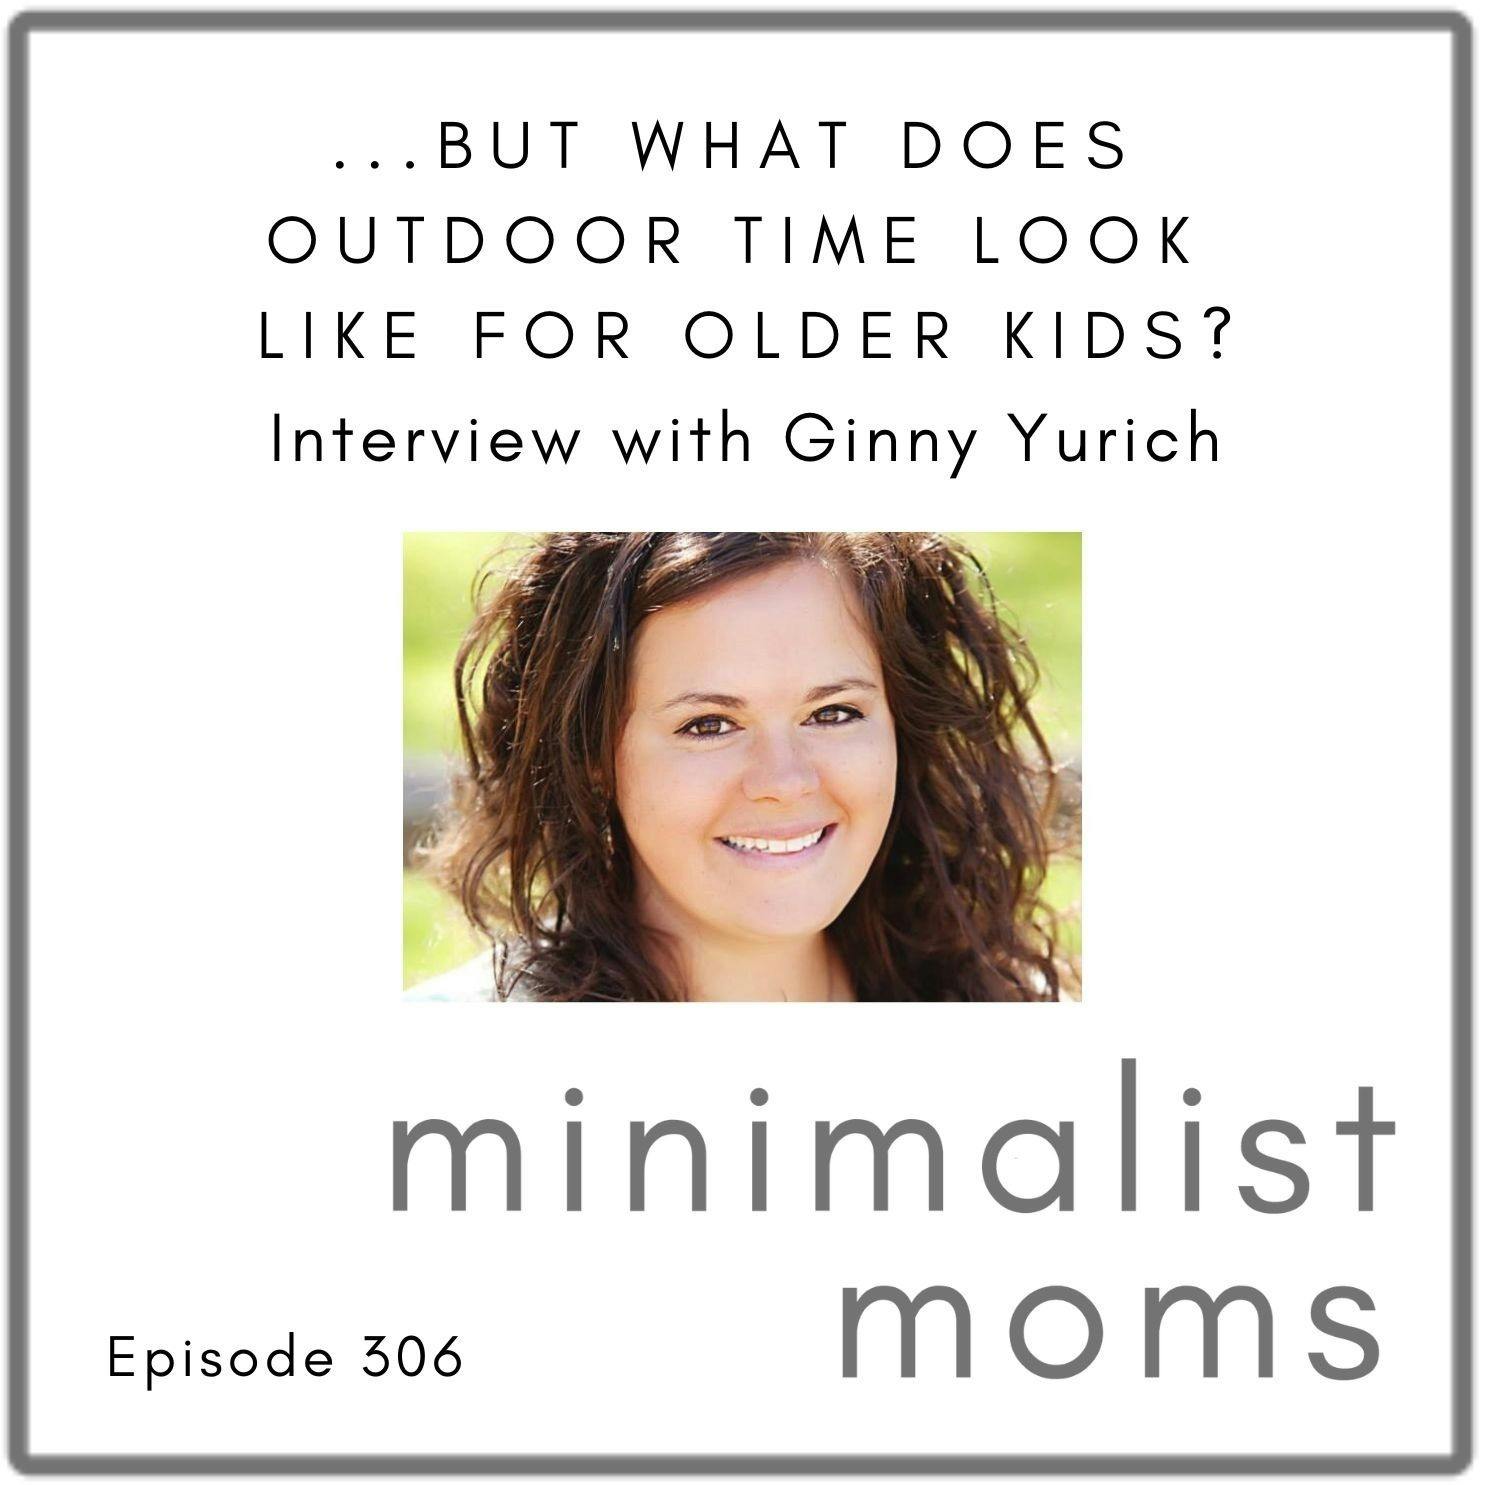 ”...But What Does Outdoor Time Look Like for the Older Kids?” with Ginny Yurich (EP306)